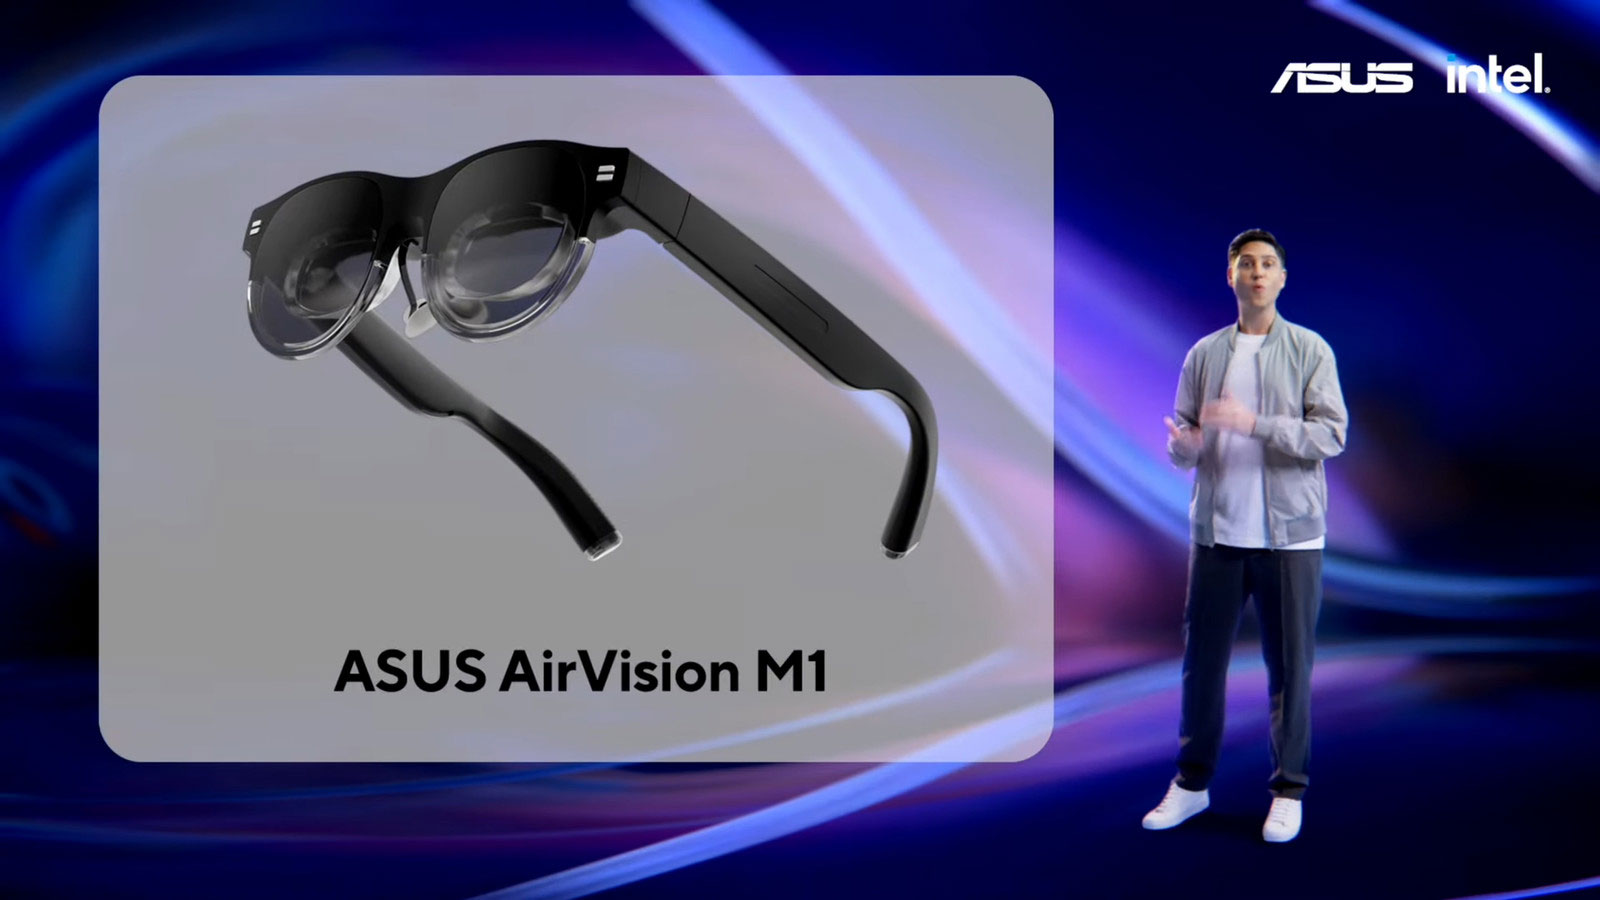 ASUS AirVision M1